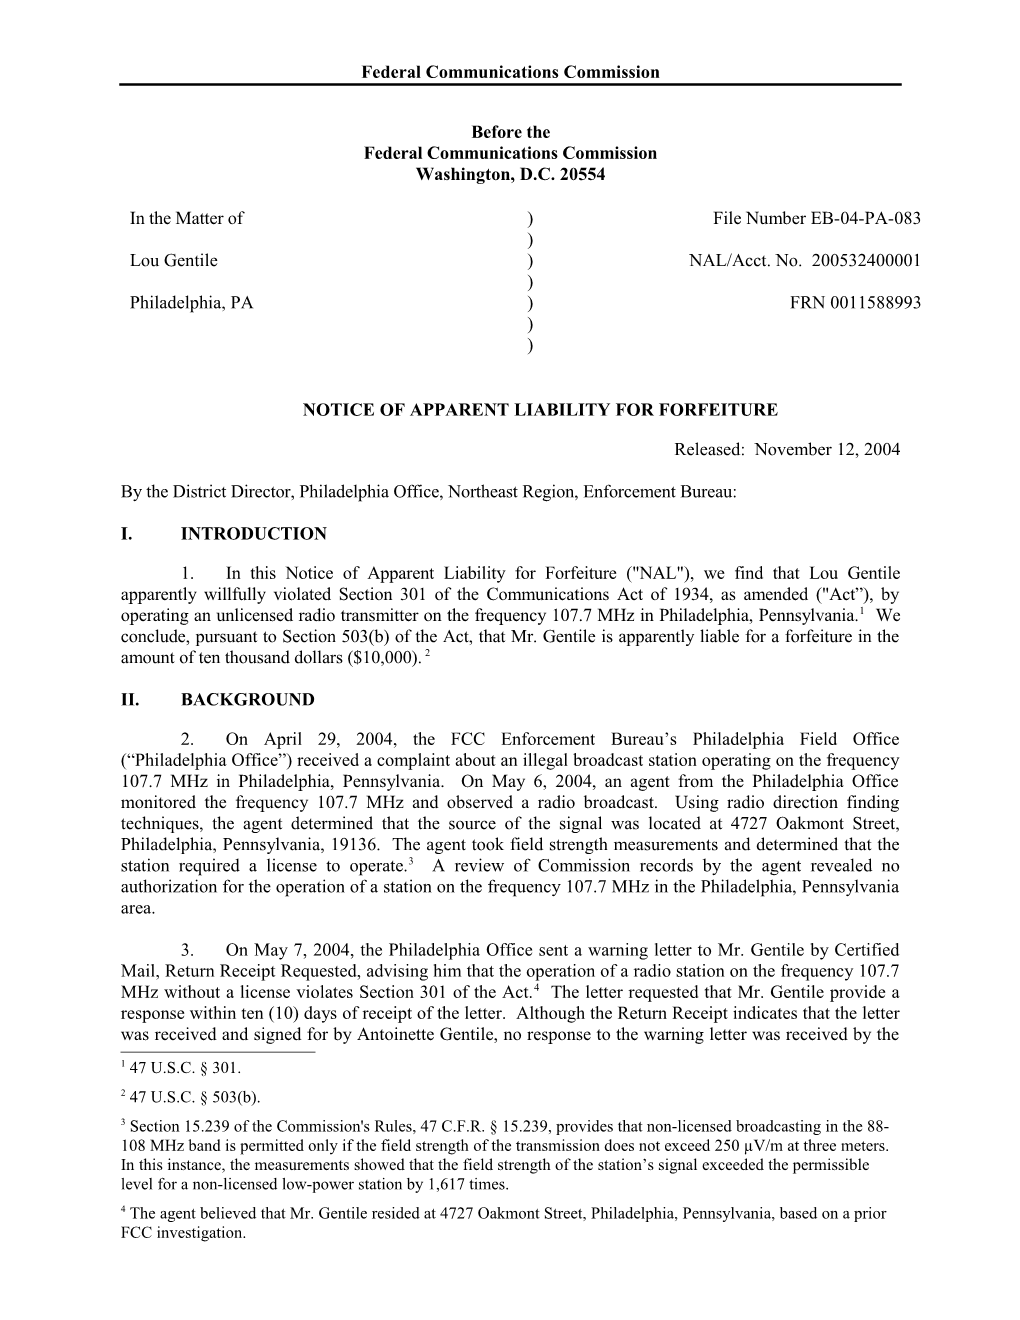 Notice of Apparent Liability for Forfeiture s4